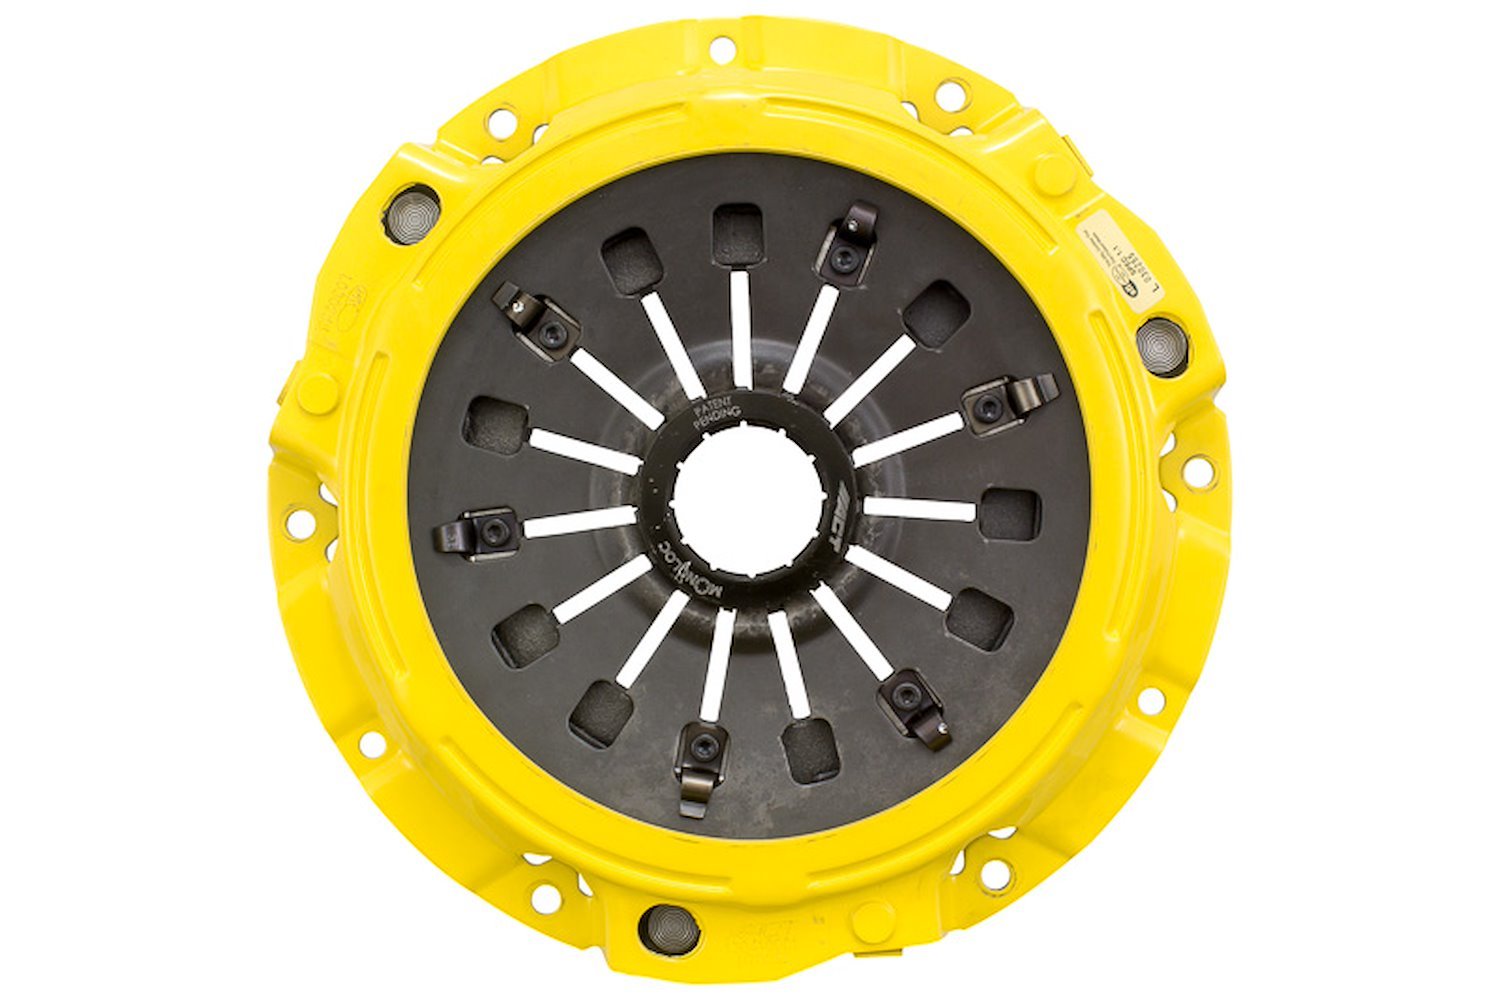 Xtreme Transmission Clutch Pressure Plate Fits Select